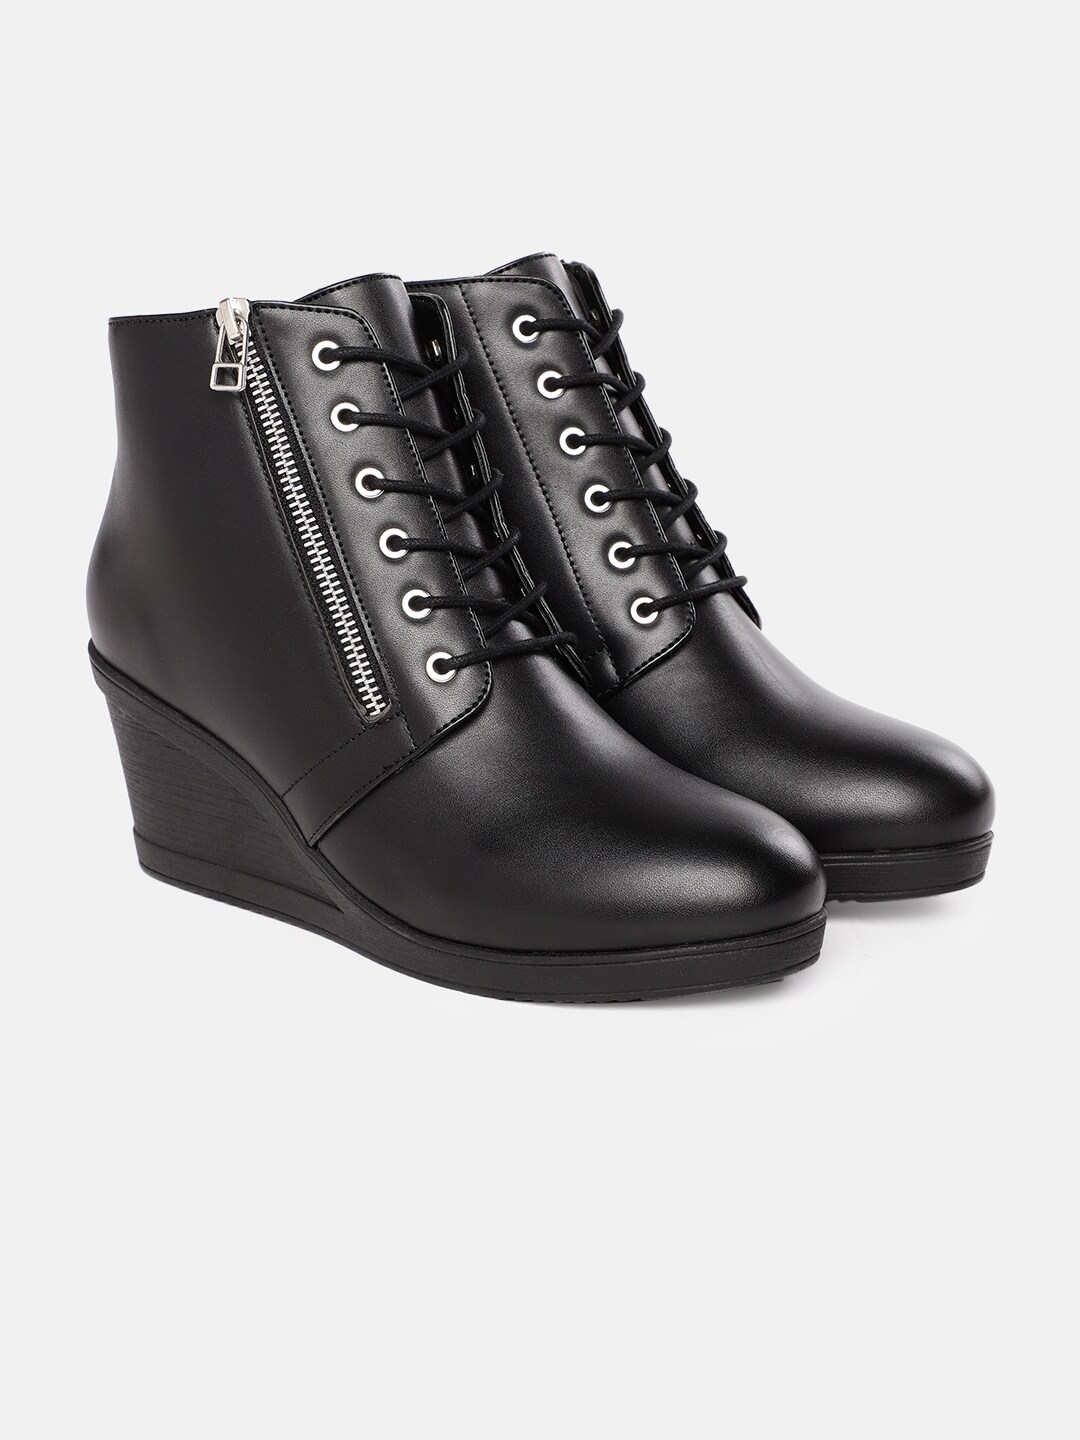 Roadster Women Black Solid Mid-Top Wedge Heeled Boots Price in India